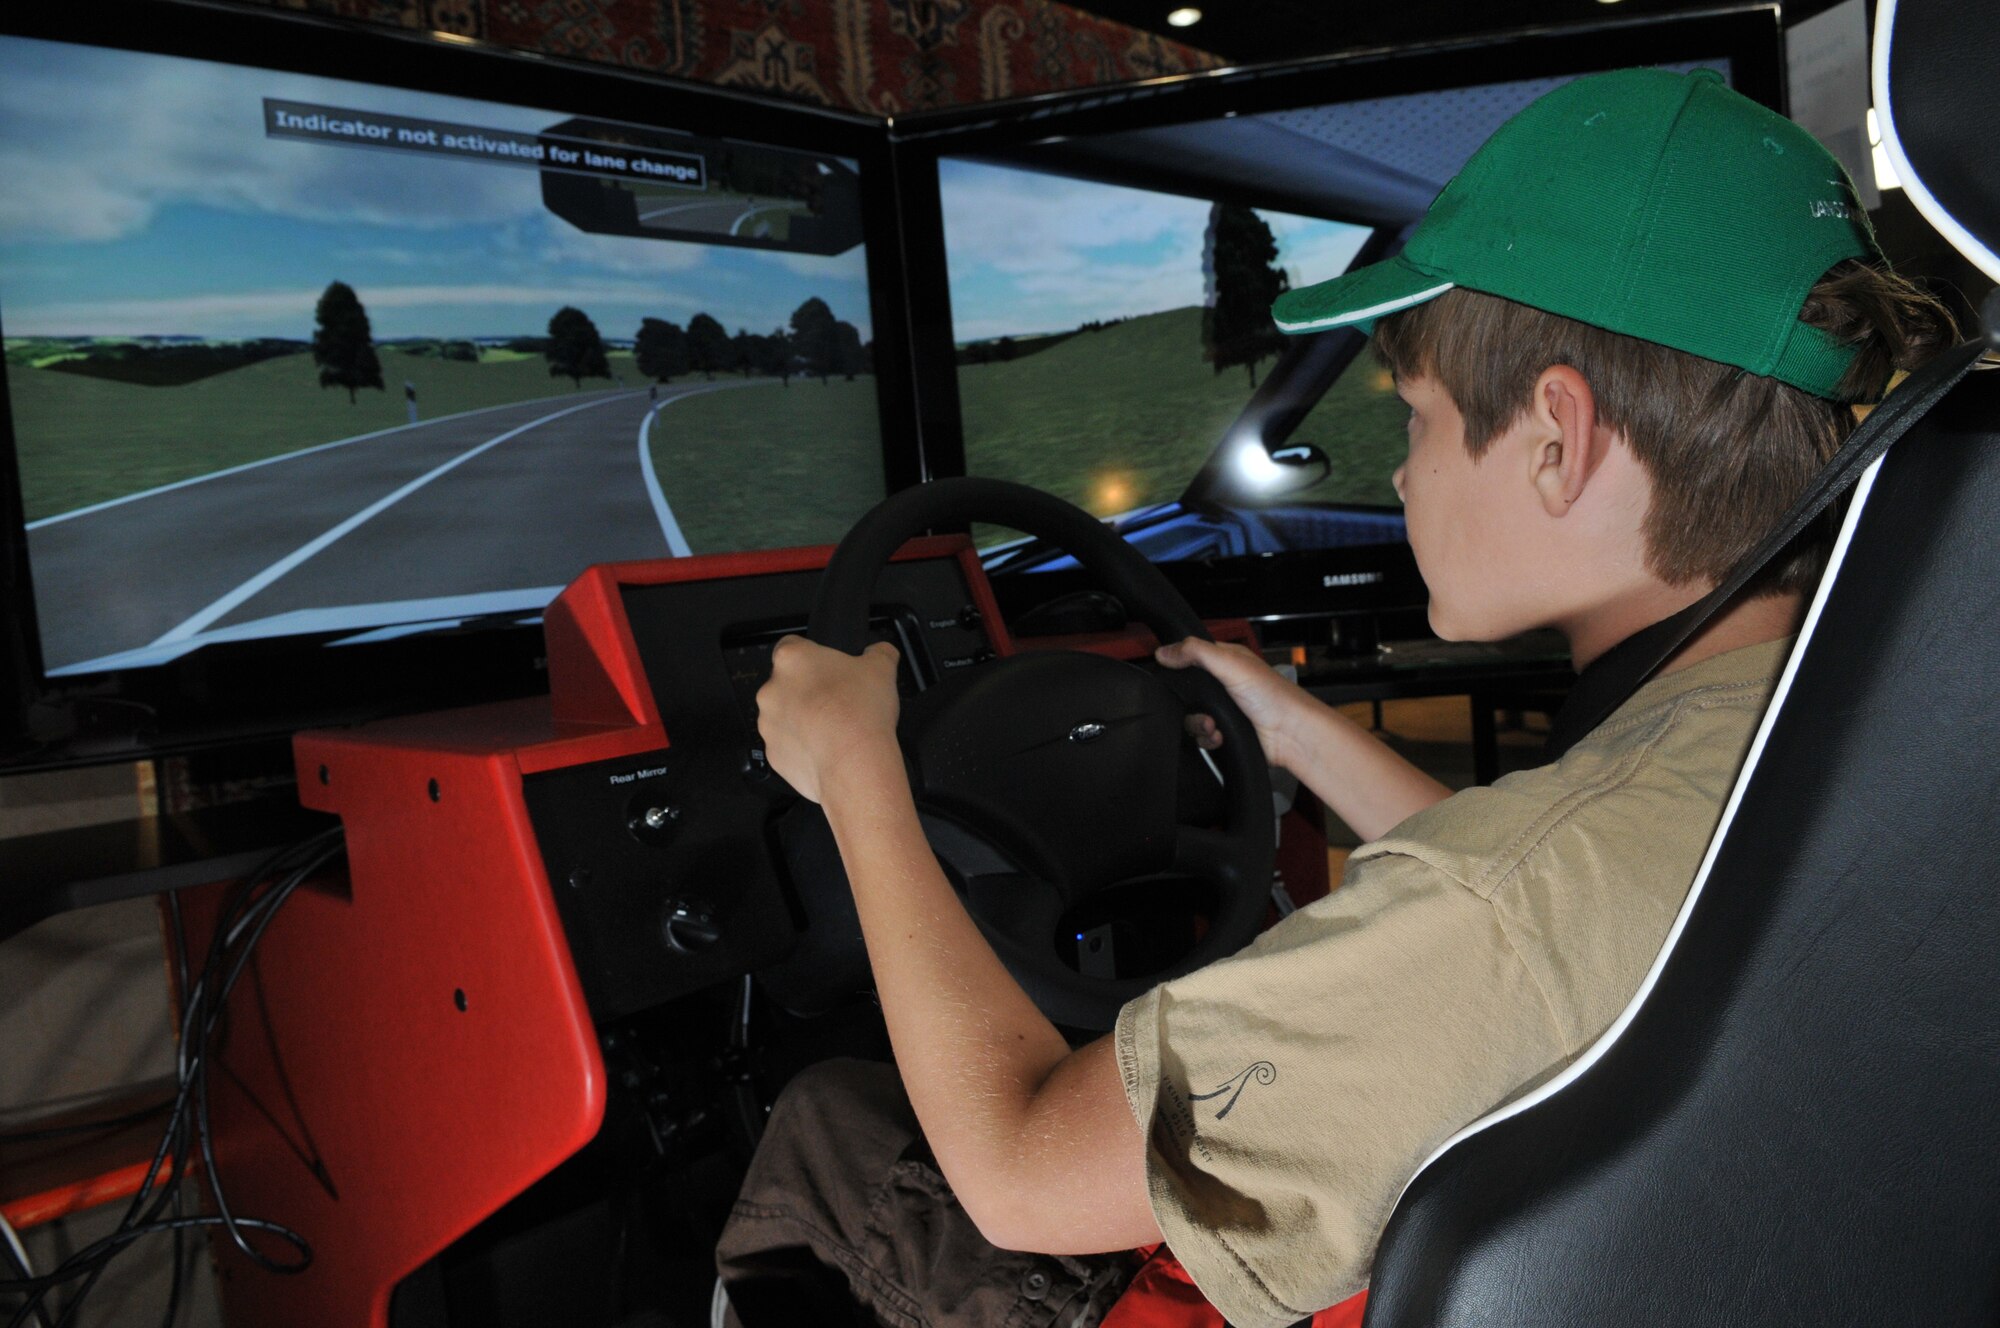 SPANGDAHLEM AIR BASE, Germany -- Alex Wrede, 11-year-old son of Maj. Valorie Wrede, 52nd Medical Operations Squadron, tests out a driving simulator at the Eifel Holiday Bazaar Nov. 13. The bazaar featured more than 100 booths ranging from driver simulators to European vendors selling handmade soaps, wine, jewelry, furniture, clothing and dishware to members of the 52nd Fighter Wing. (U.S. Air Force photo/Airman 1st Class Nick Wilson)